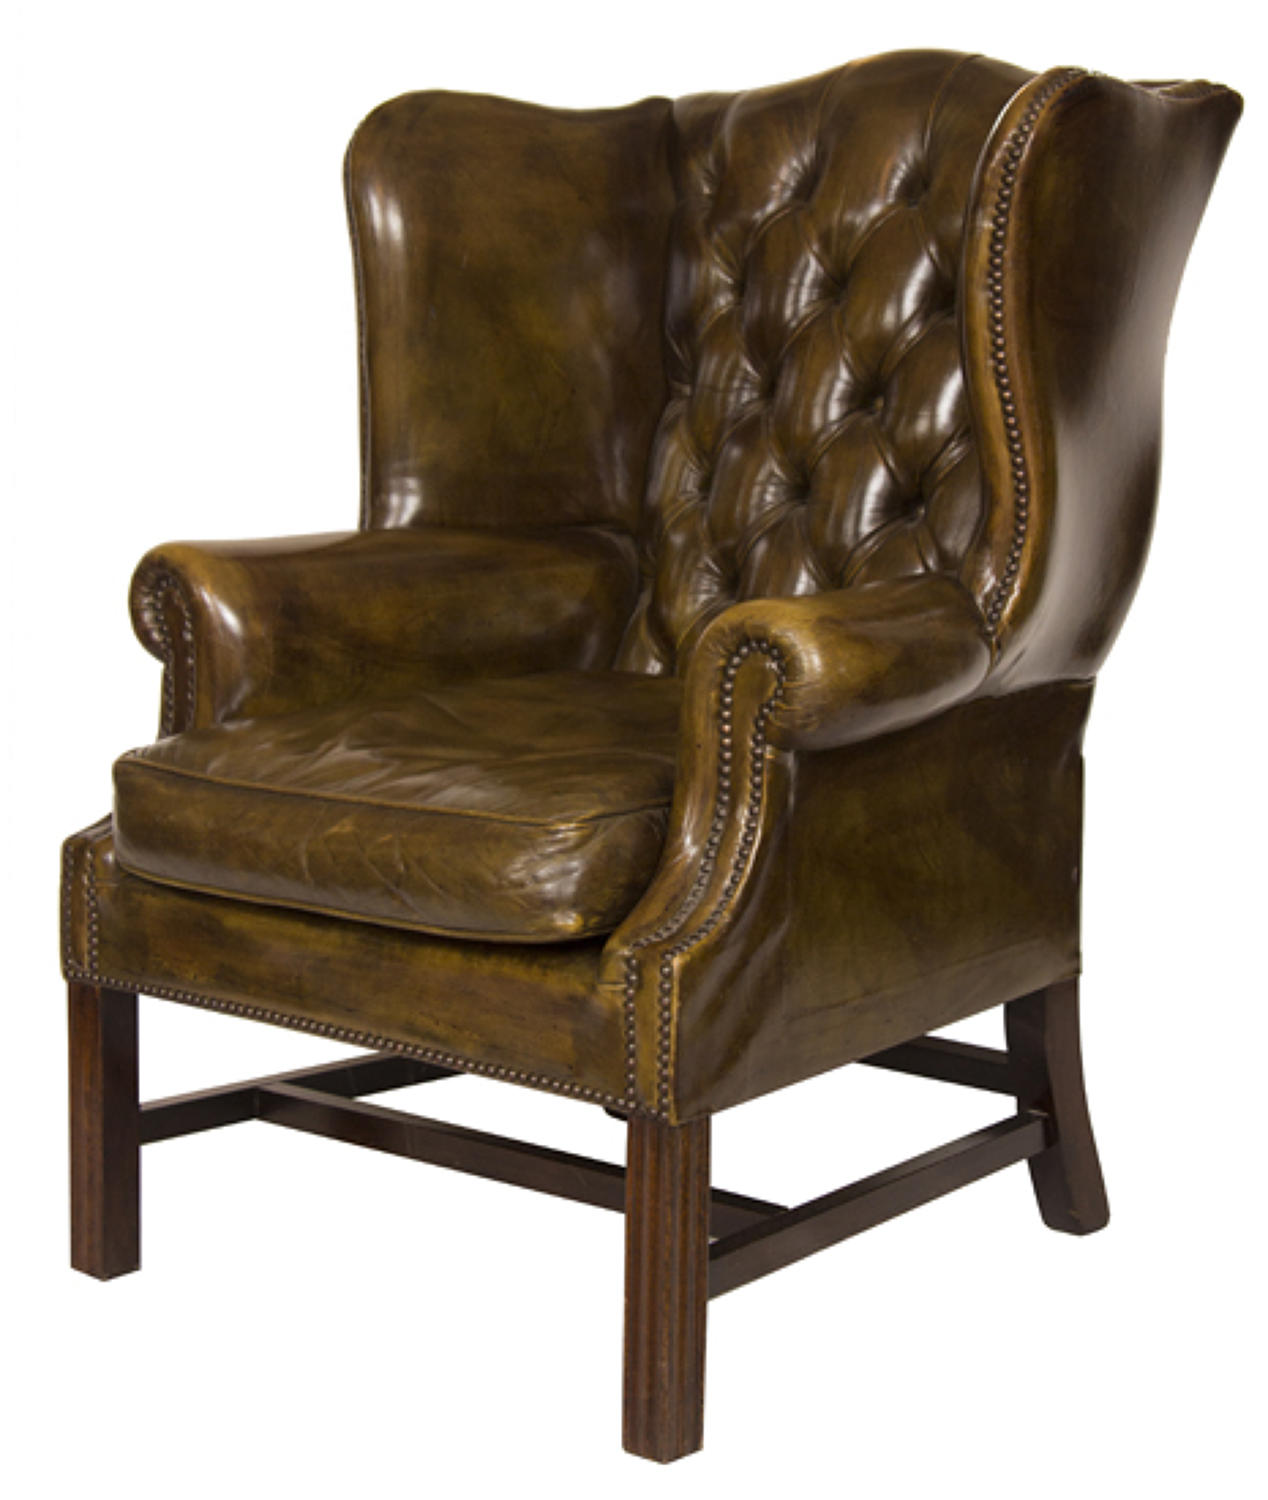 A superb deep green leather wing chair